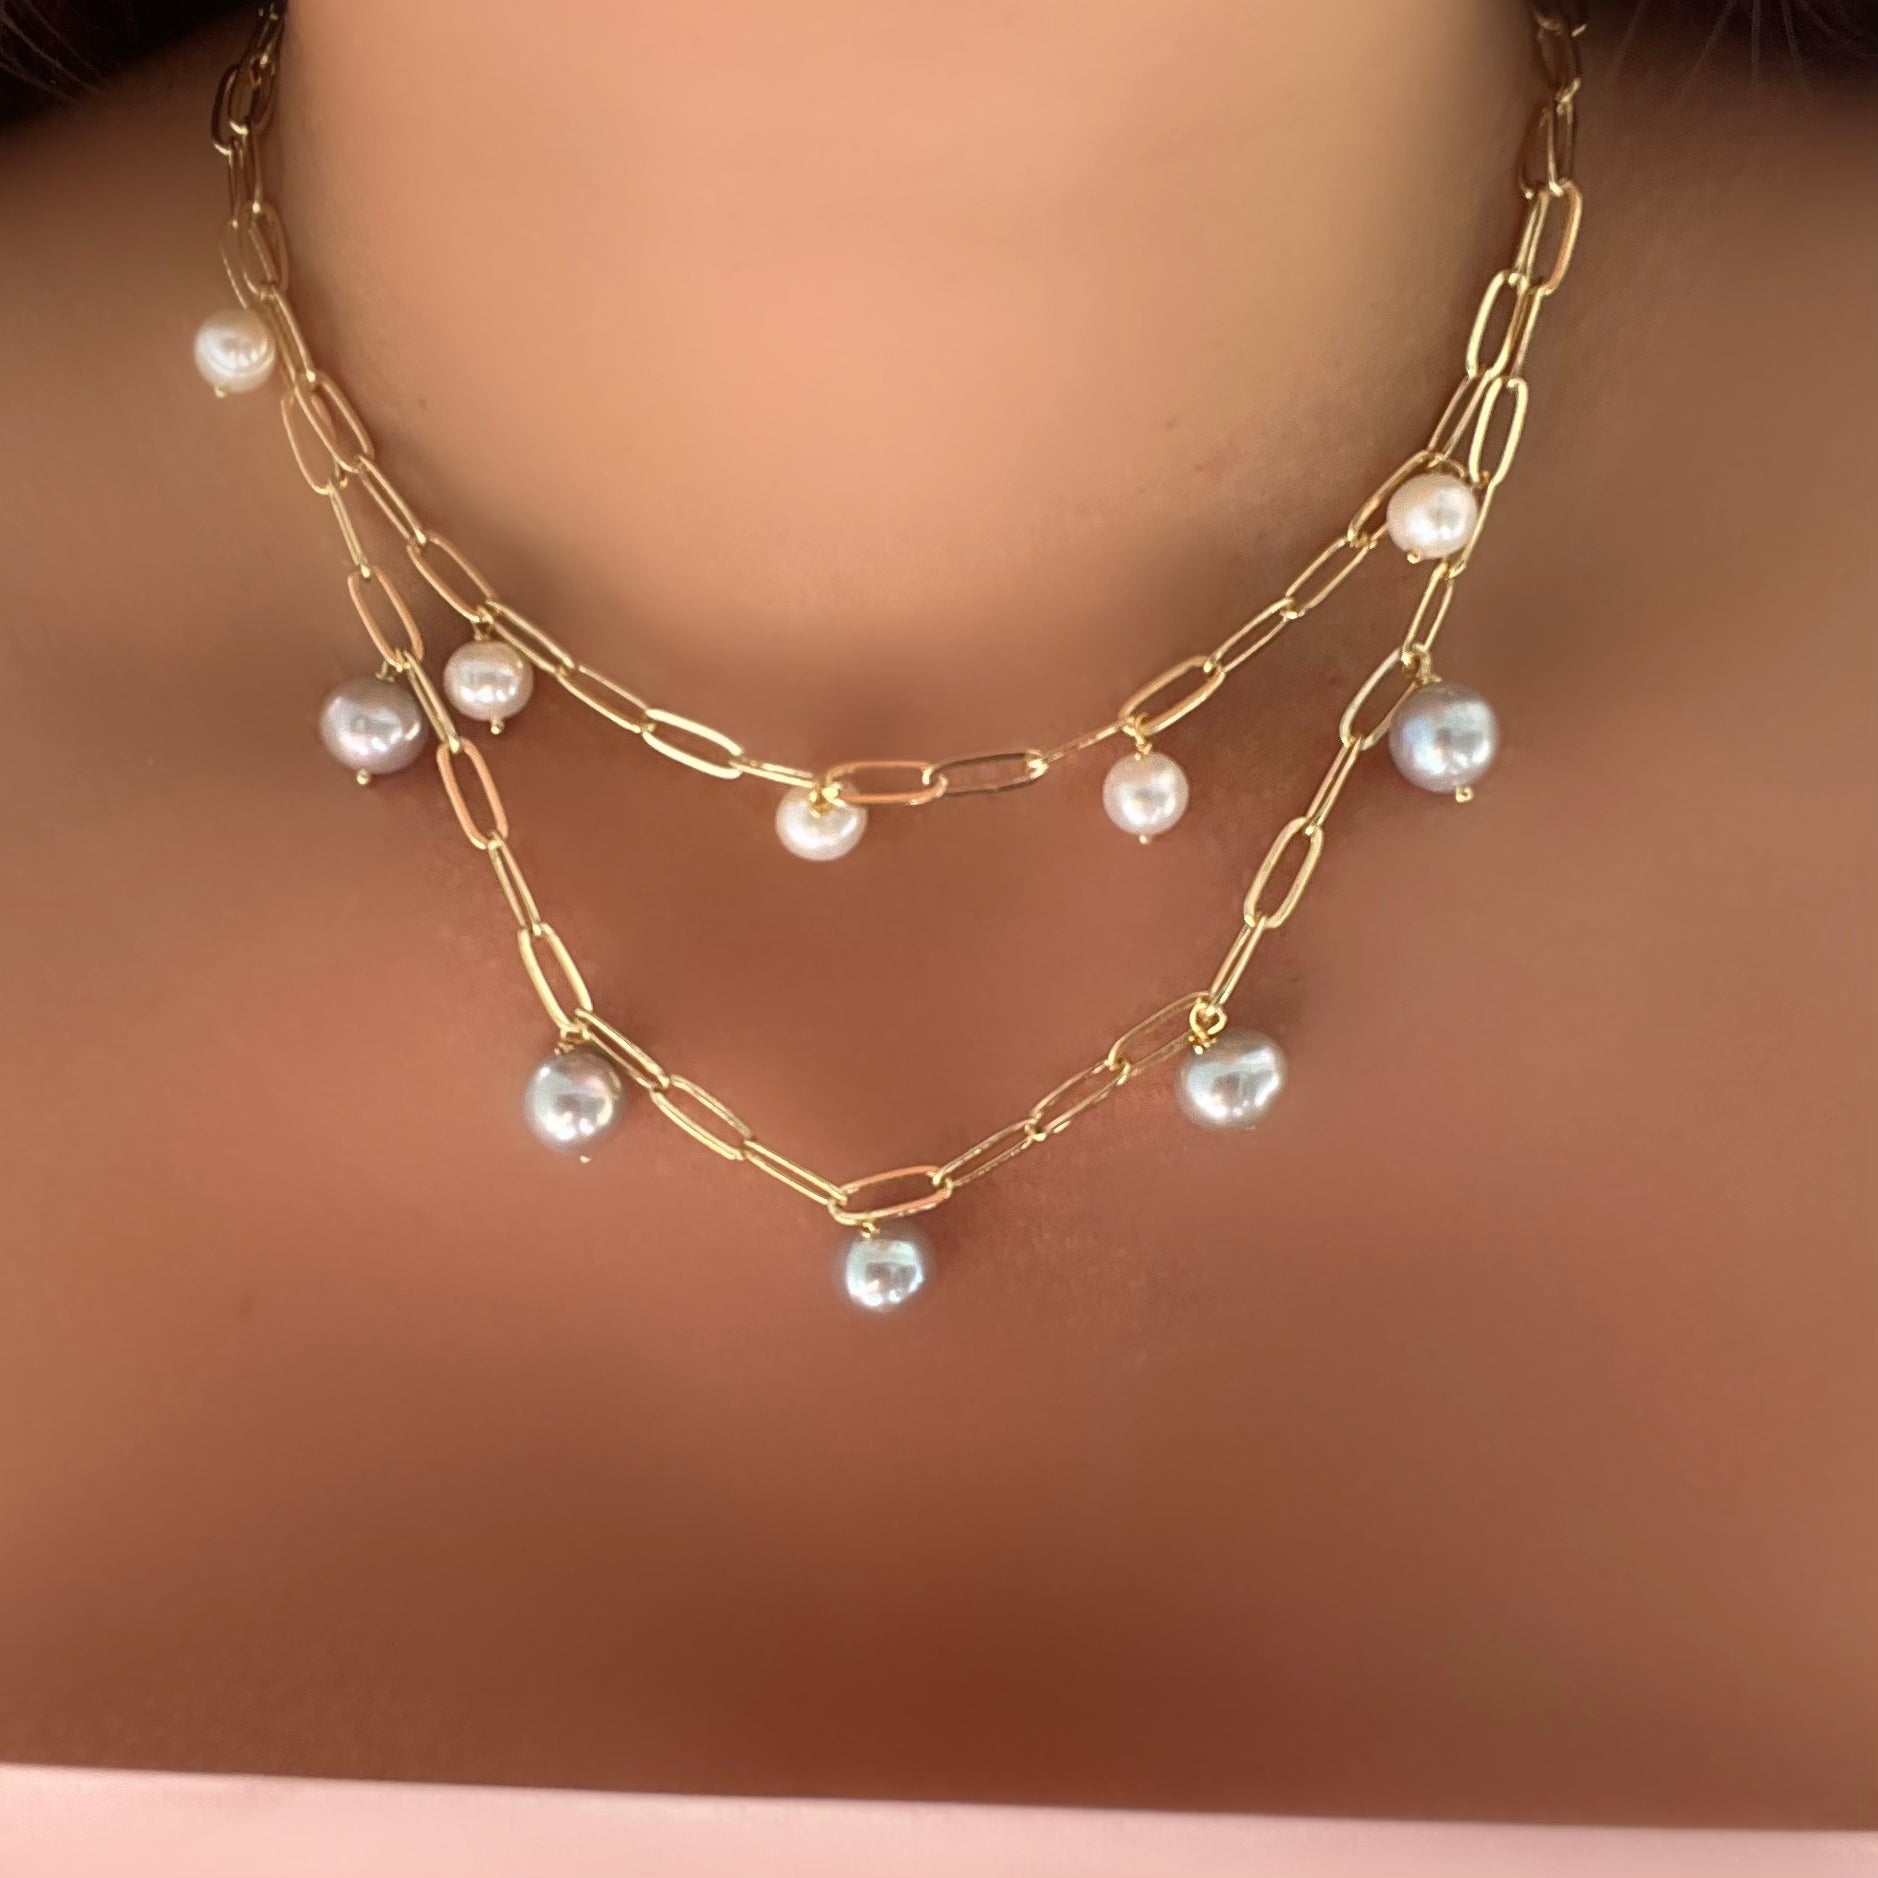 5 Pearls Chain Necklace